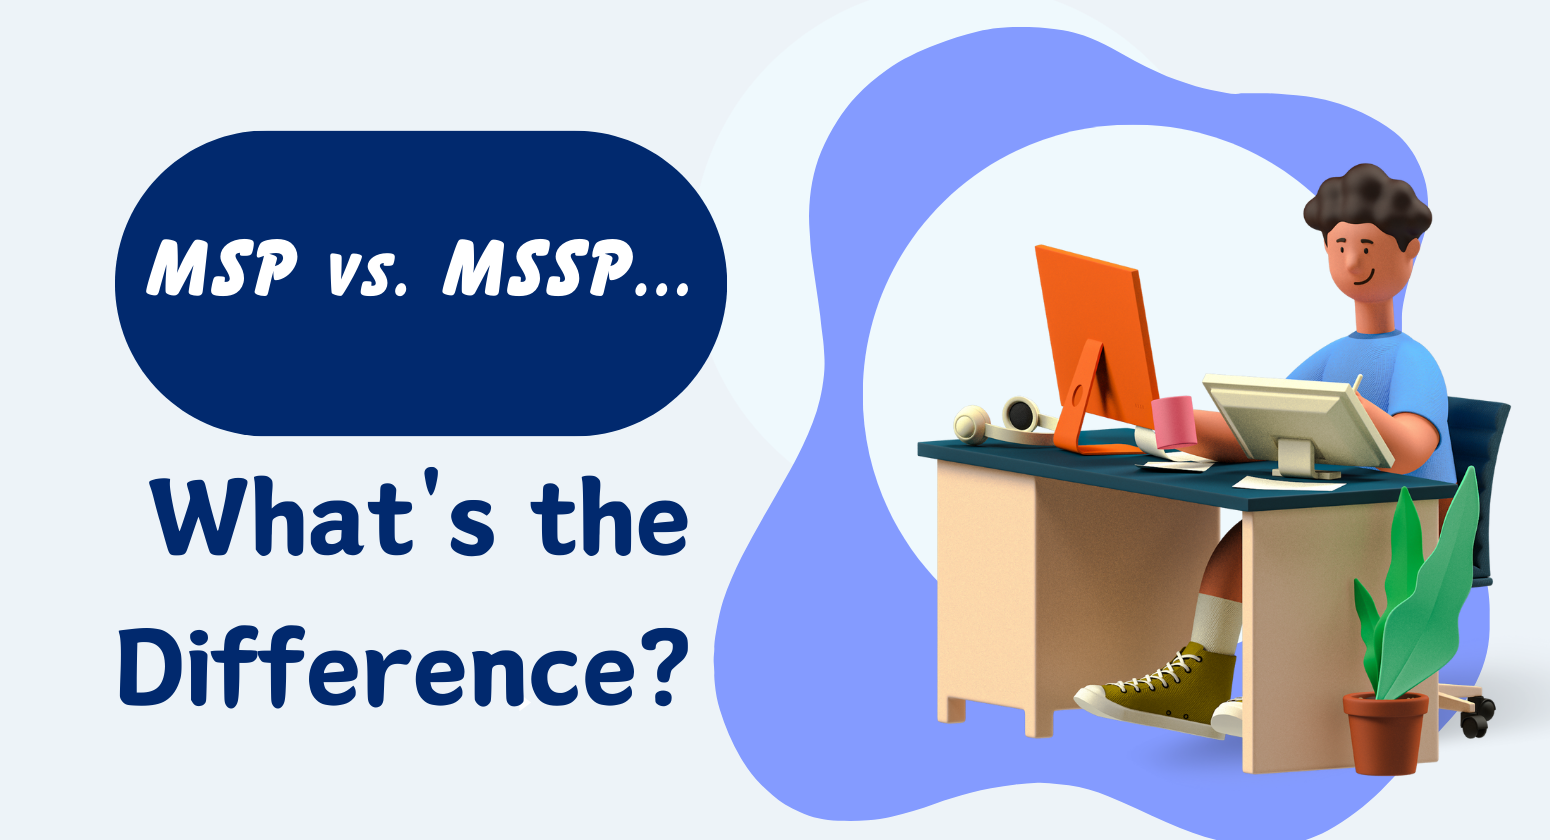 MSP vs. MSSP… What’s the Difference?